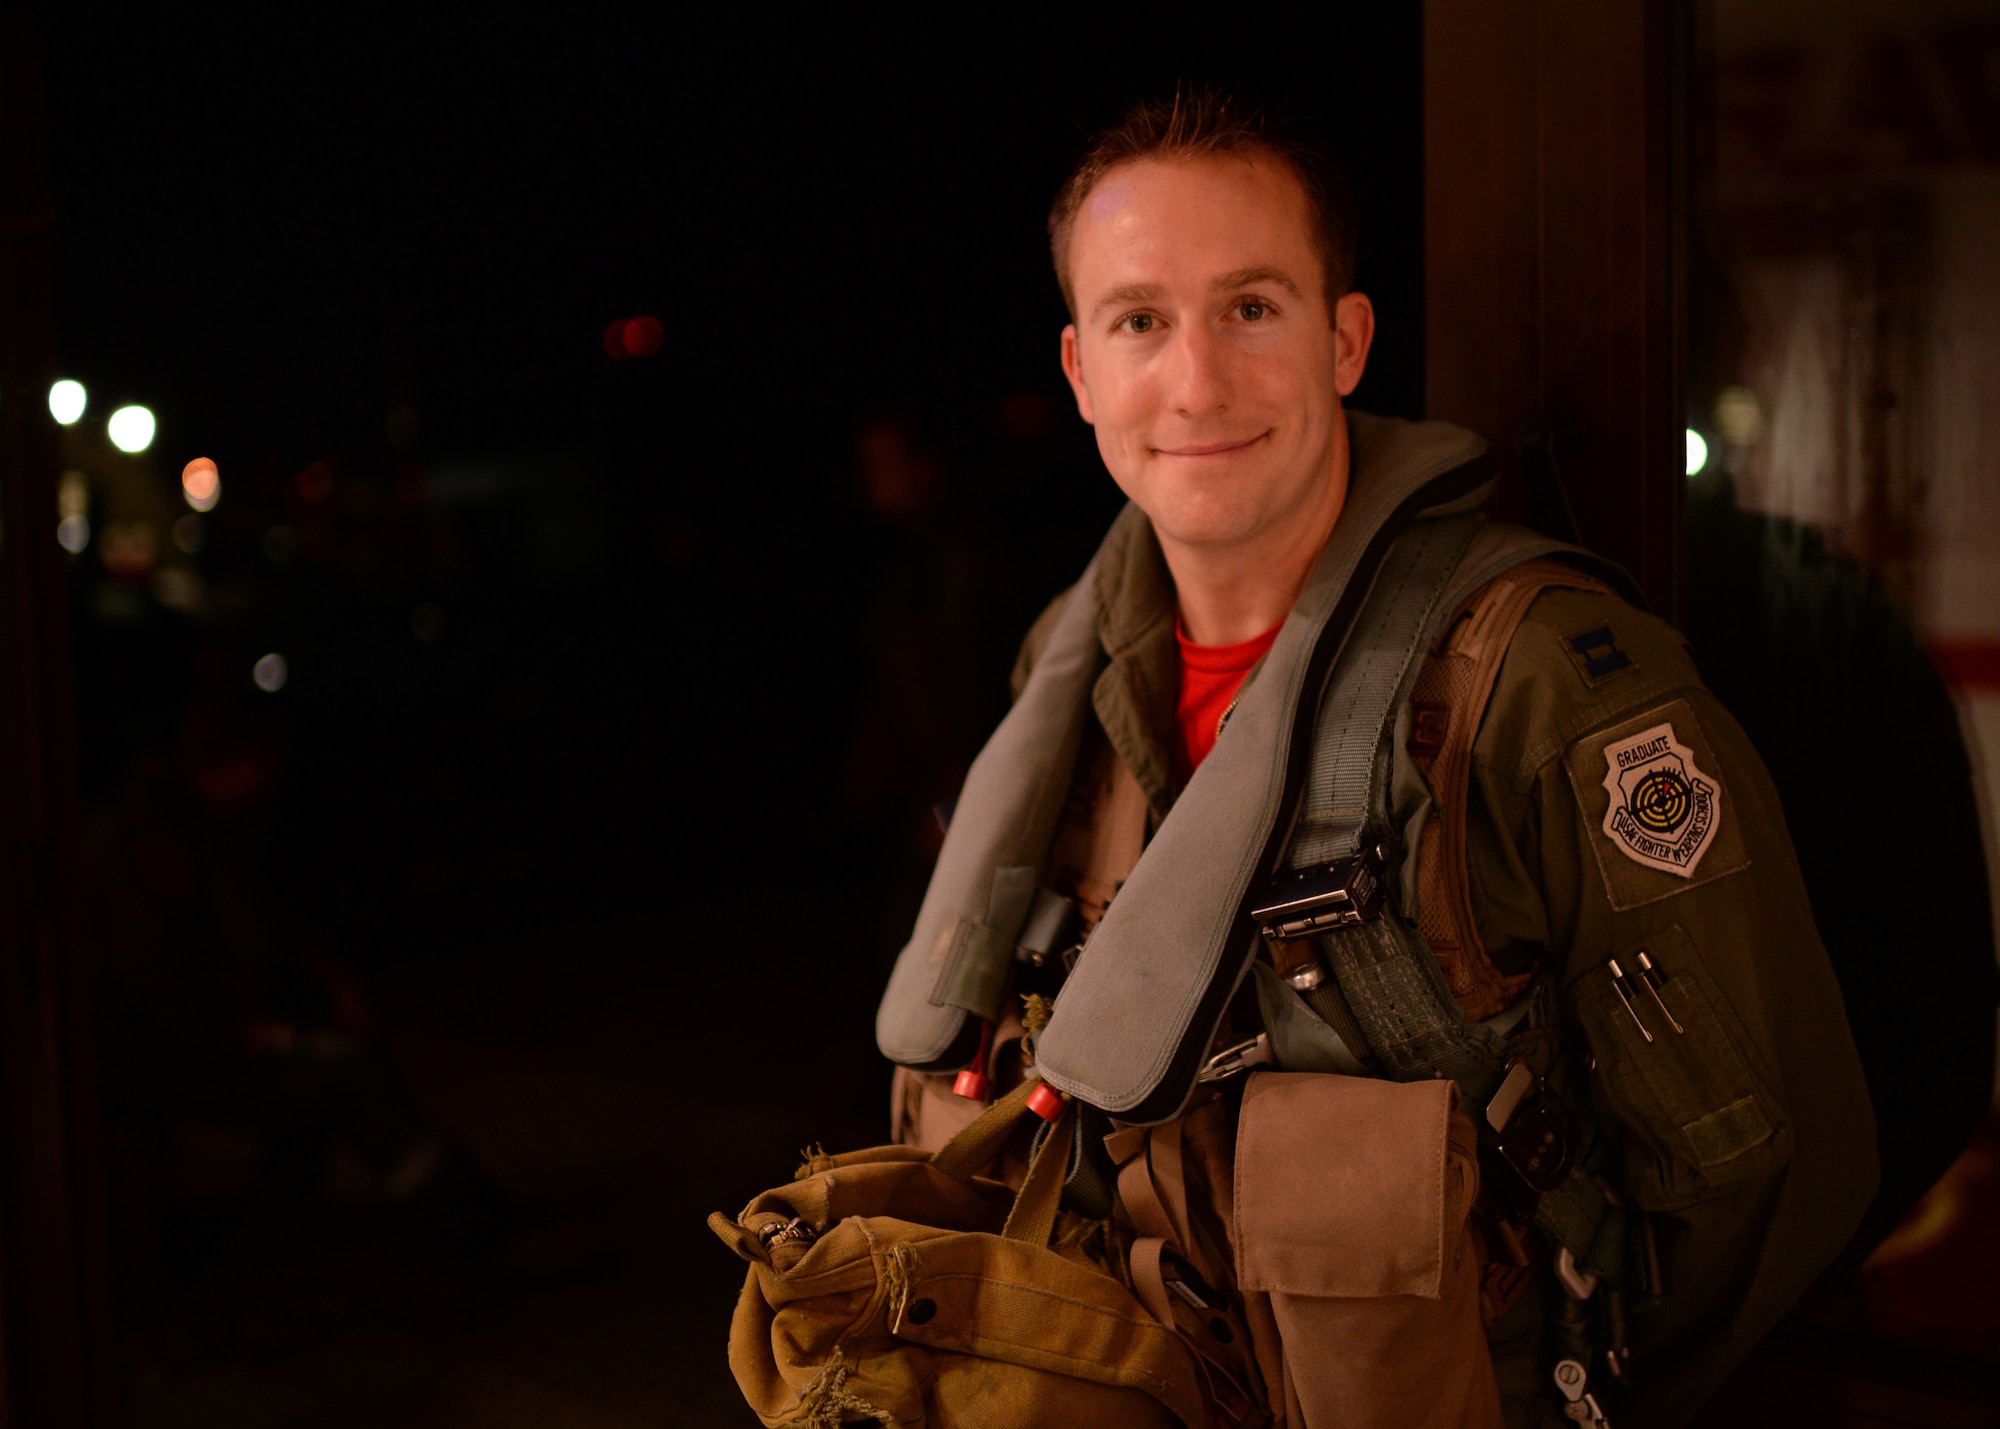 U.S. Air Force Capt. Taylor Blevins, a U.S. Air Force F-16 Fighting Falcon fighter aircraft pilot from the 480th Fighter Squadron at Spangdahlem Air Base, Germany, poses for a photograph Aug. 8, 2014, prior to departing for a bilateral training event between the U.S. and Hellenic air forces in Souda Bay, Greece, Aug. 11-23. This event not only satisfies training requirements for the squadron, but it aims to expand strategic and operational ties with the Hellenic air force. (U.S. Air Force photo by Staff Sgt. Daryl Knee/Released)